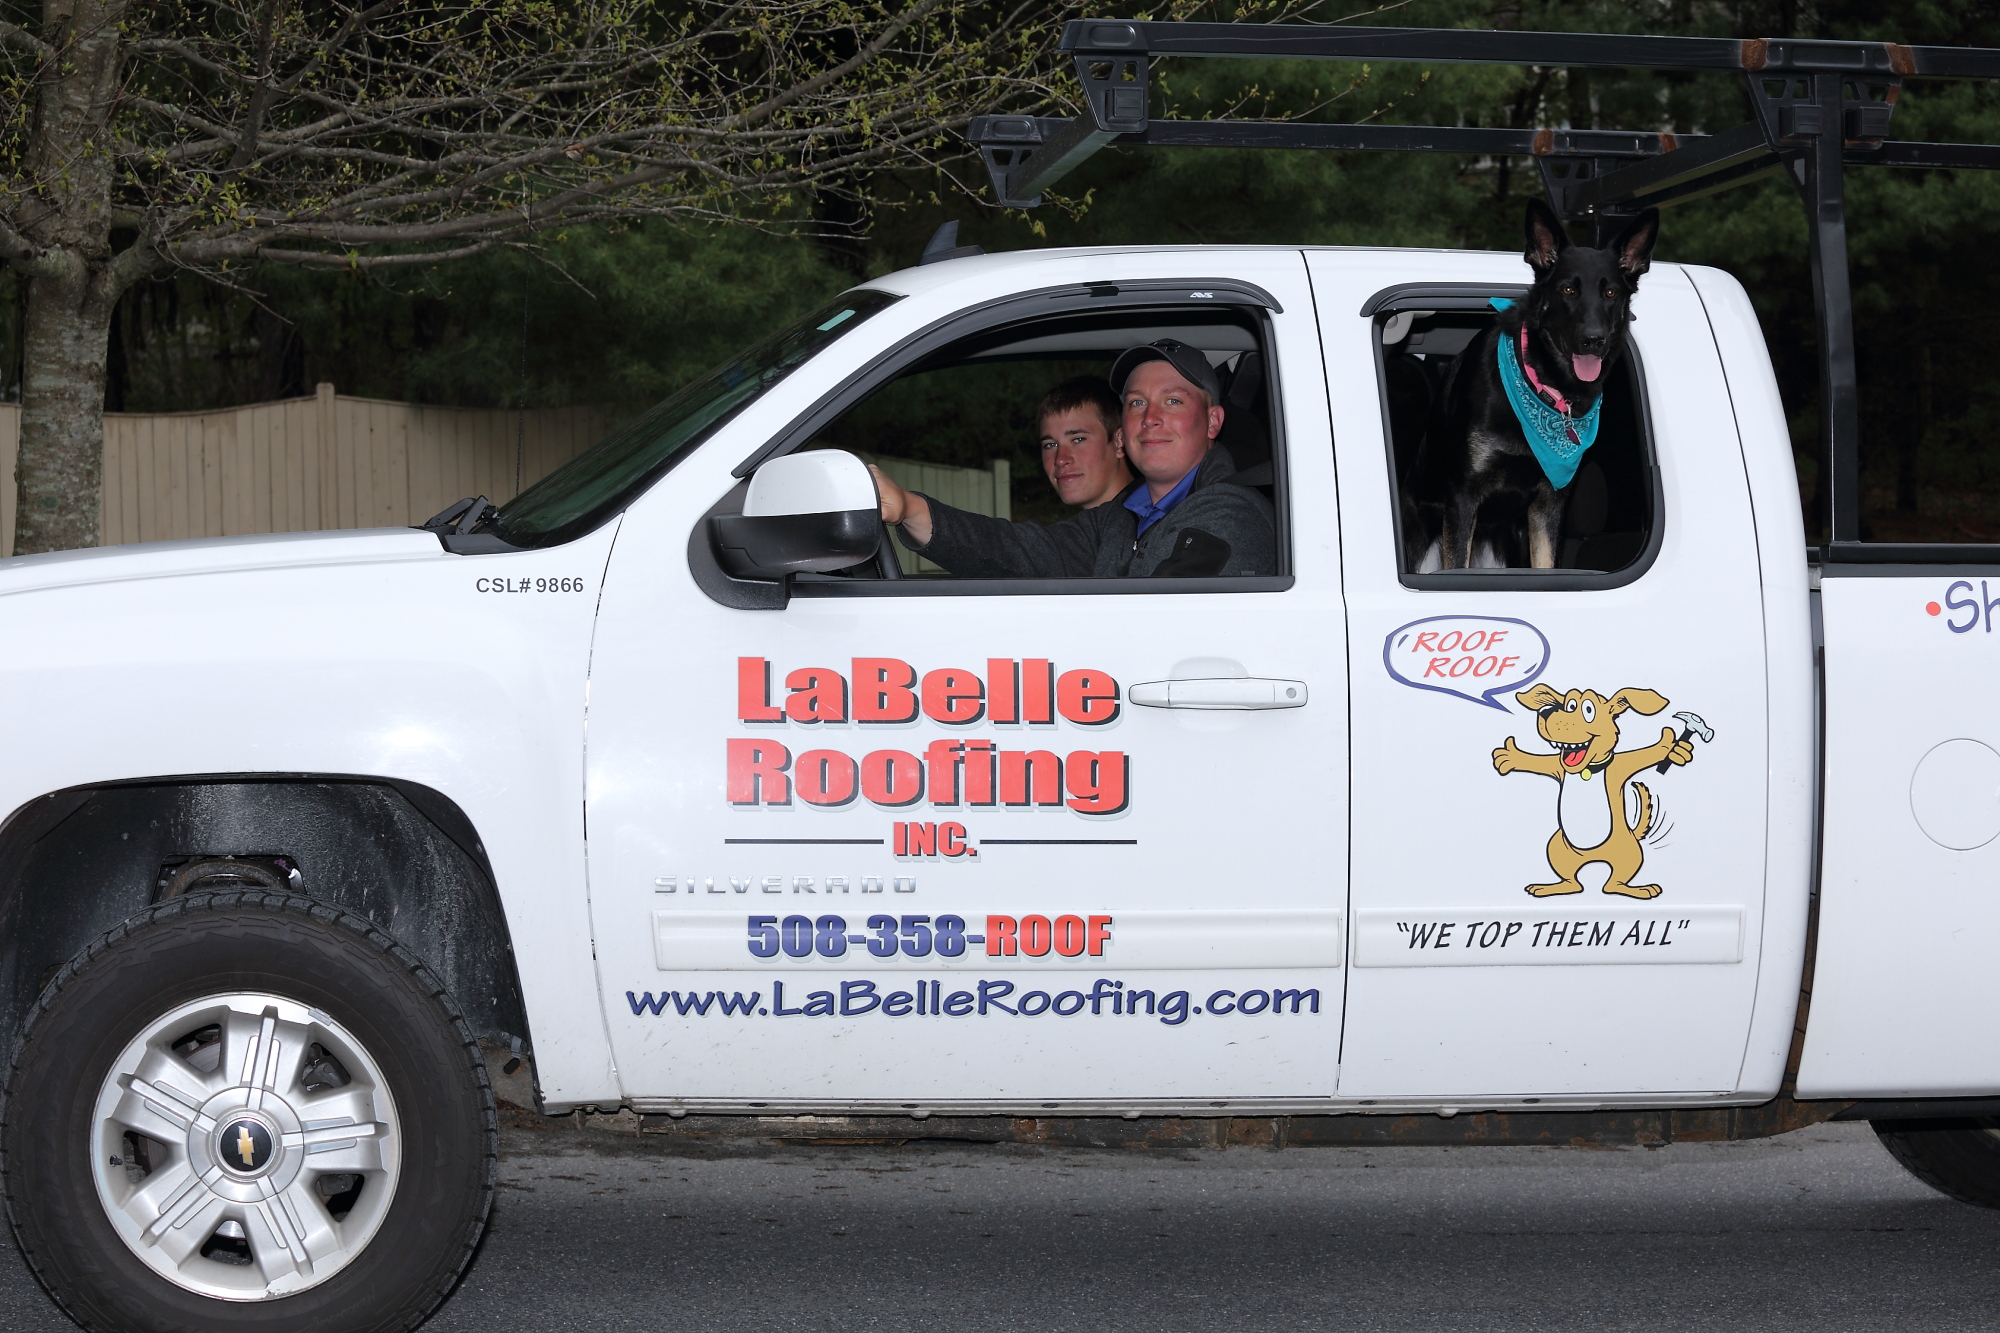 LaBelle Roofing, Inc